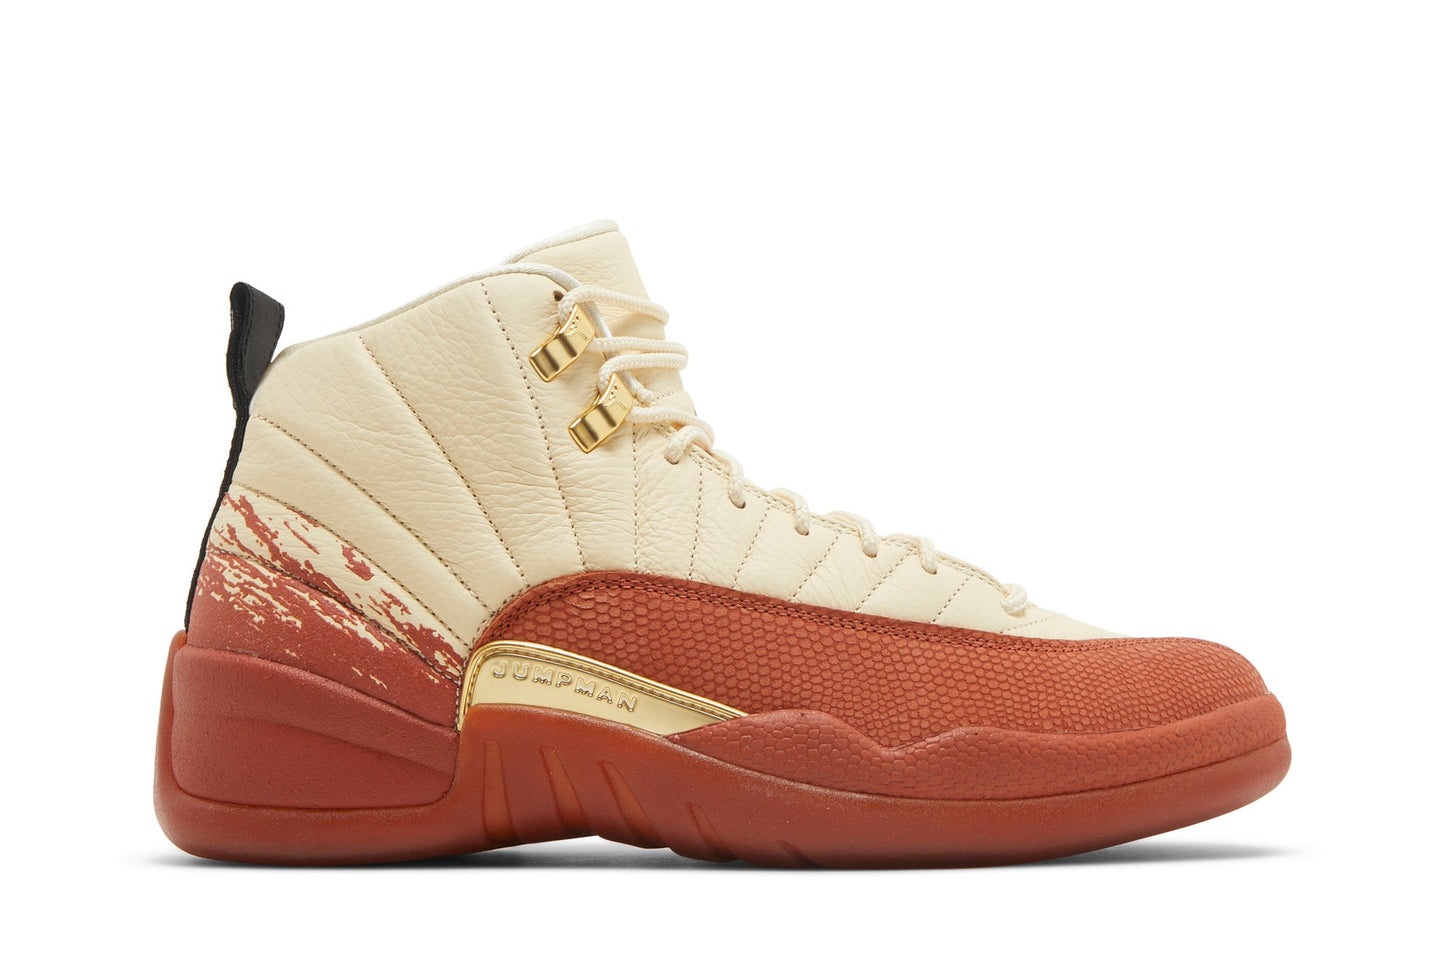 Jordan 12 Retro Eastside Golf Out of the Clay